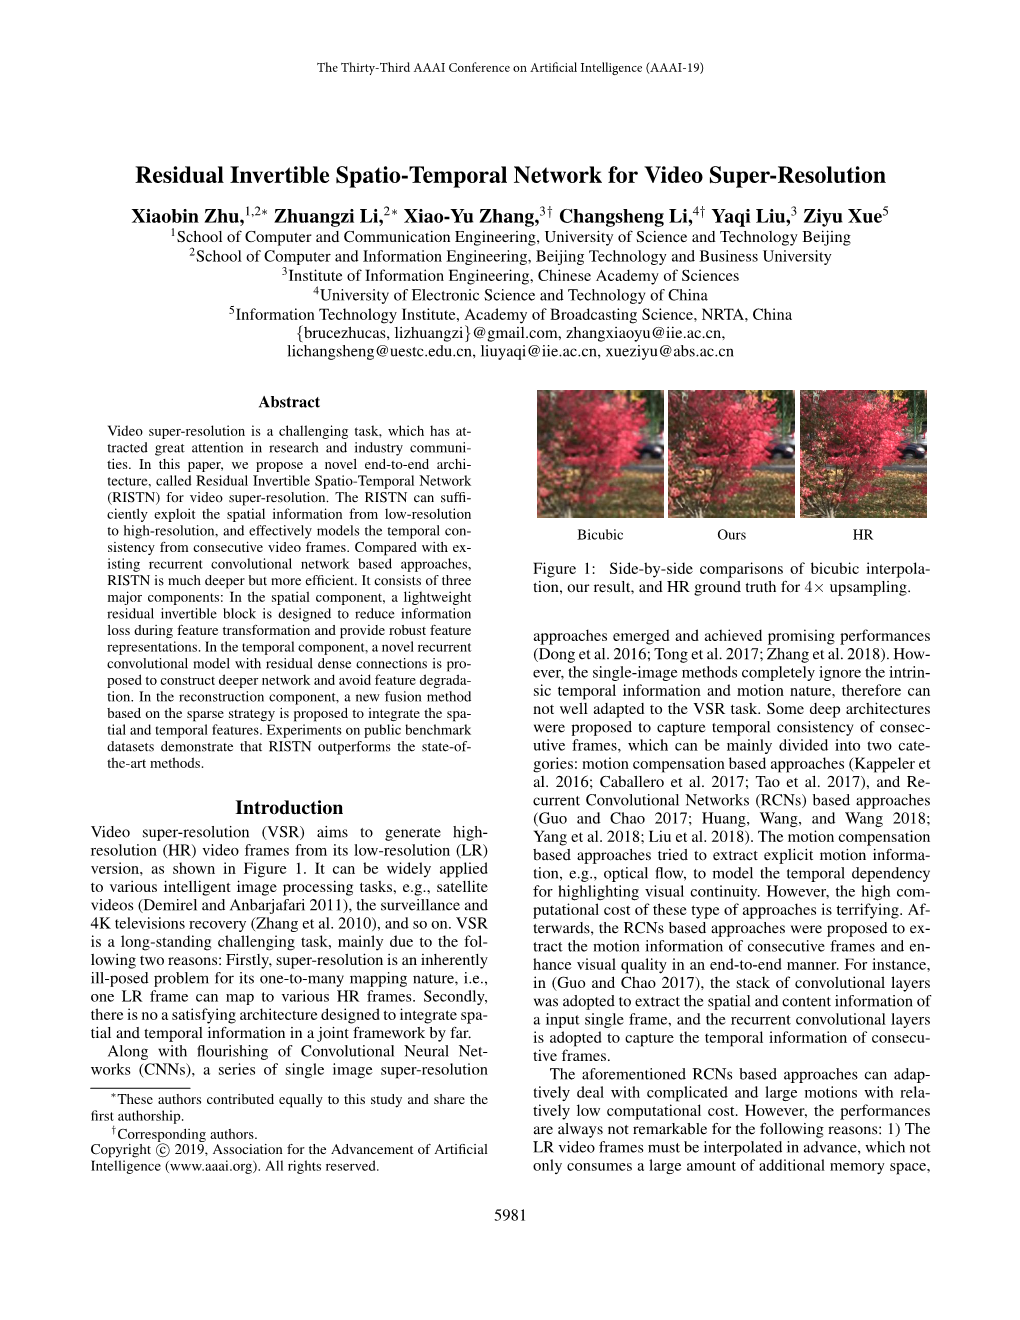 Residual Invertible Spatio-Temporal Network for Video Super-Resolution